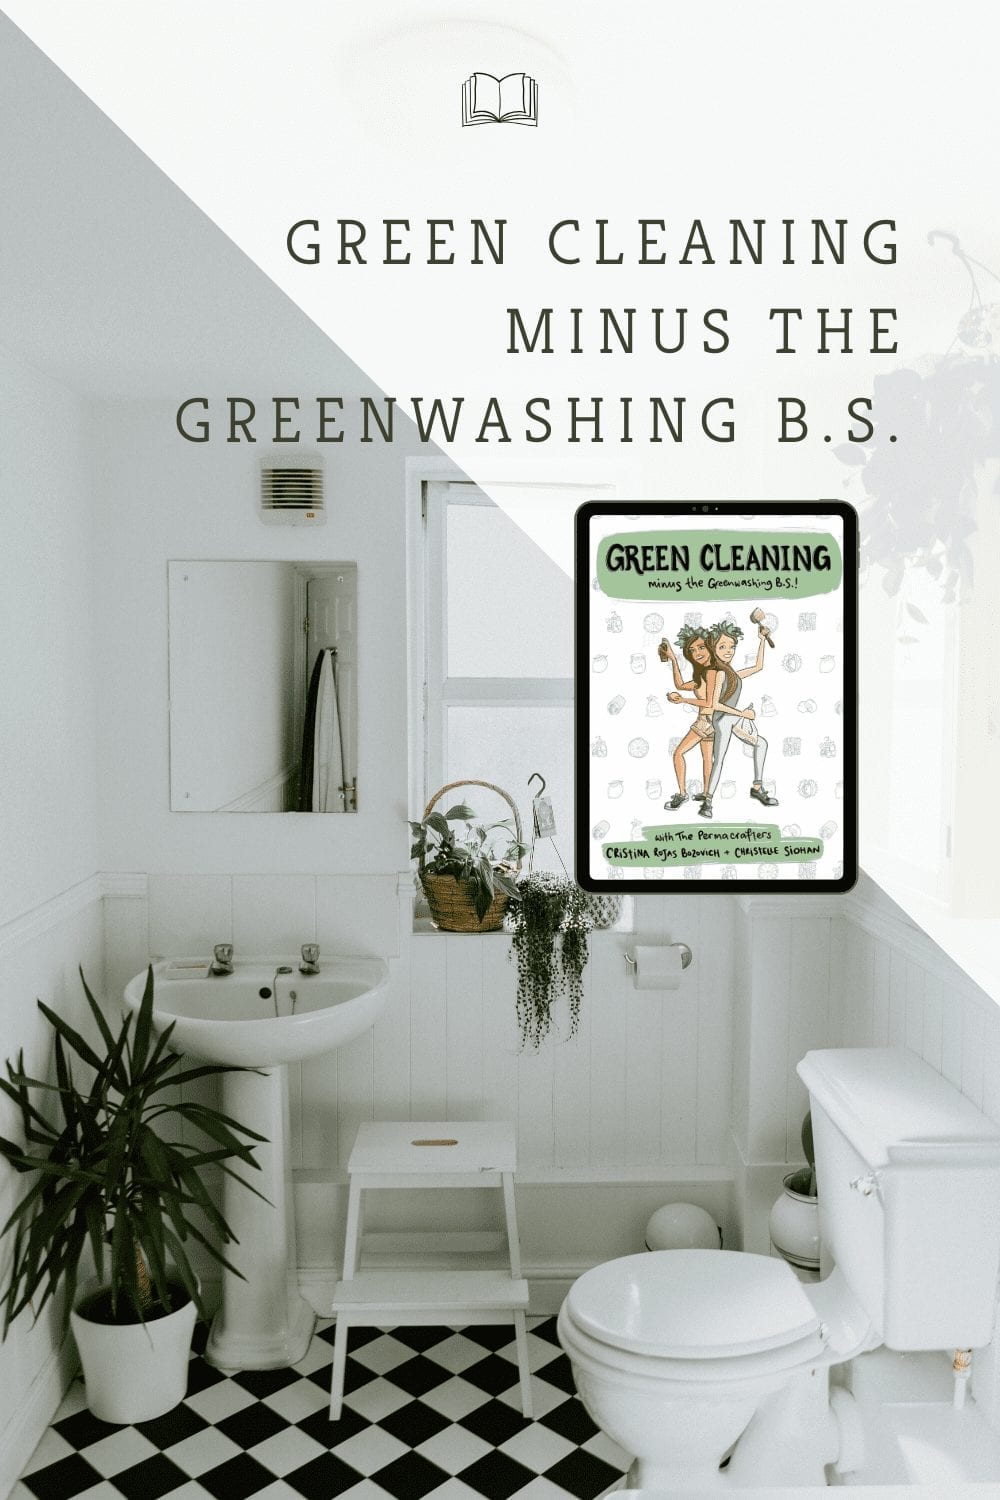 Green Cleaning Ebook